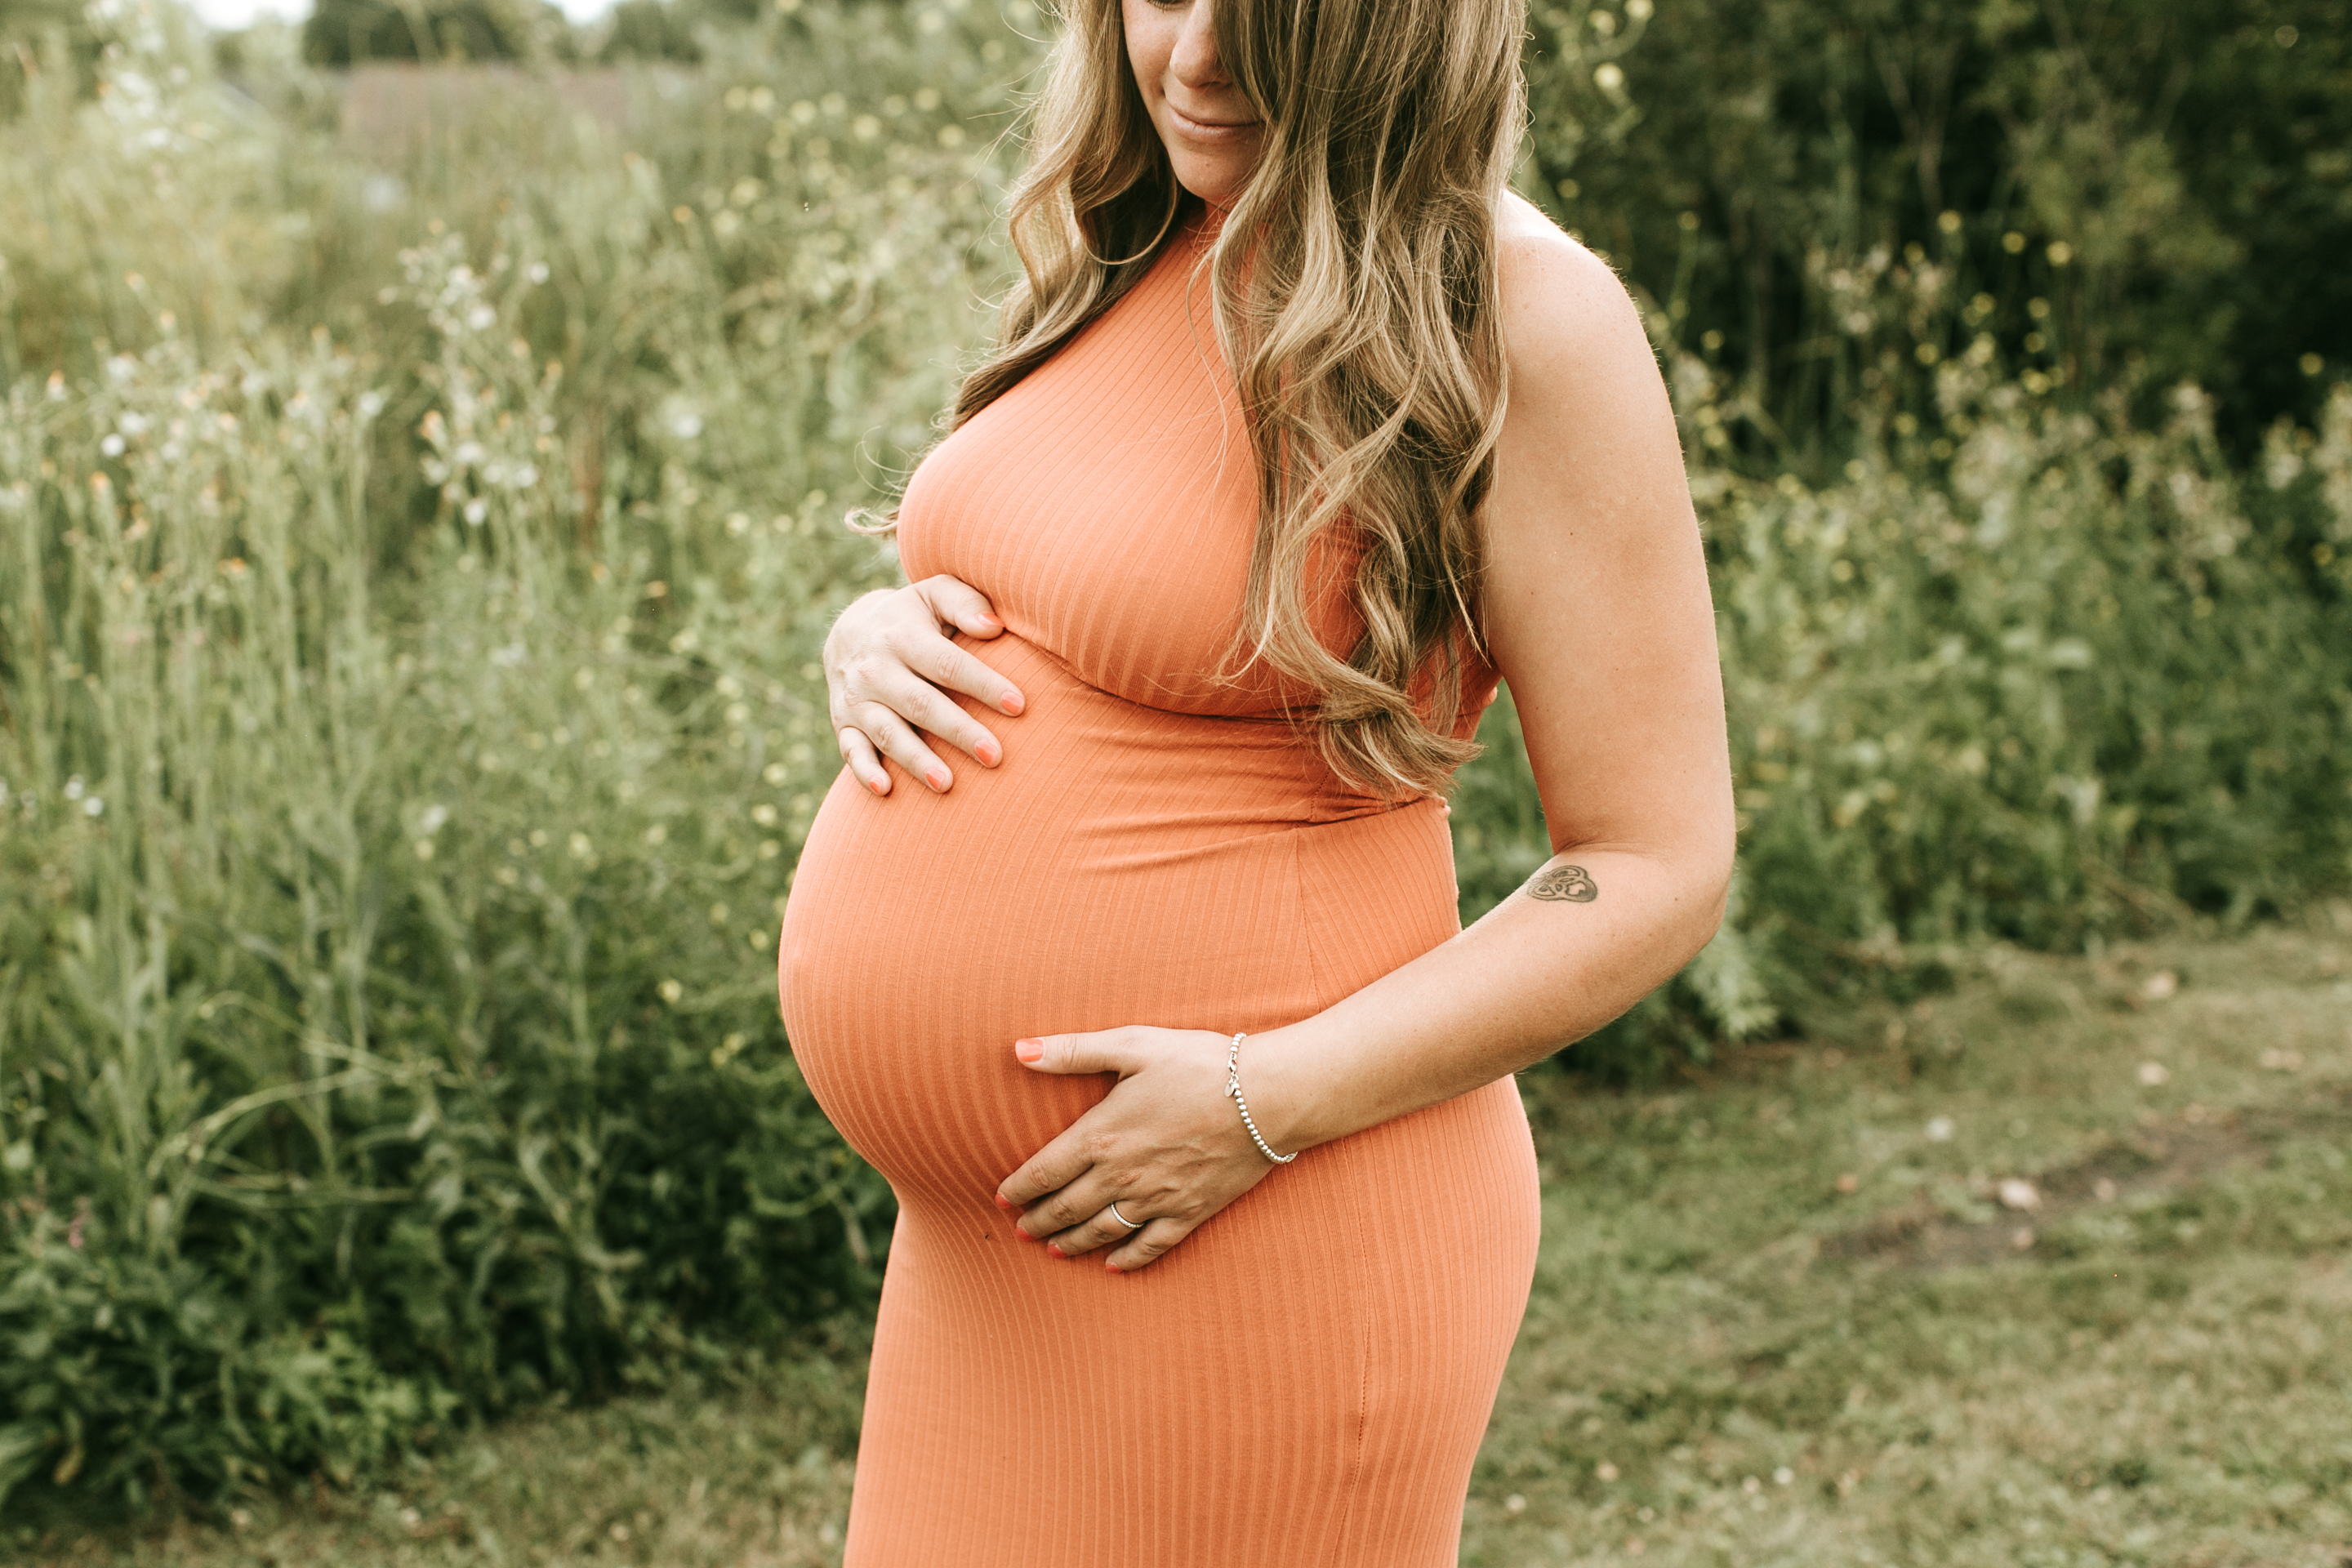 Help a girl out by understanding the 25 Things to Know about Pregnancy for First-Time Moms